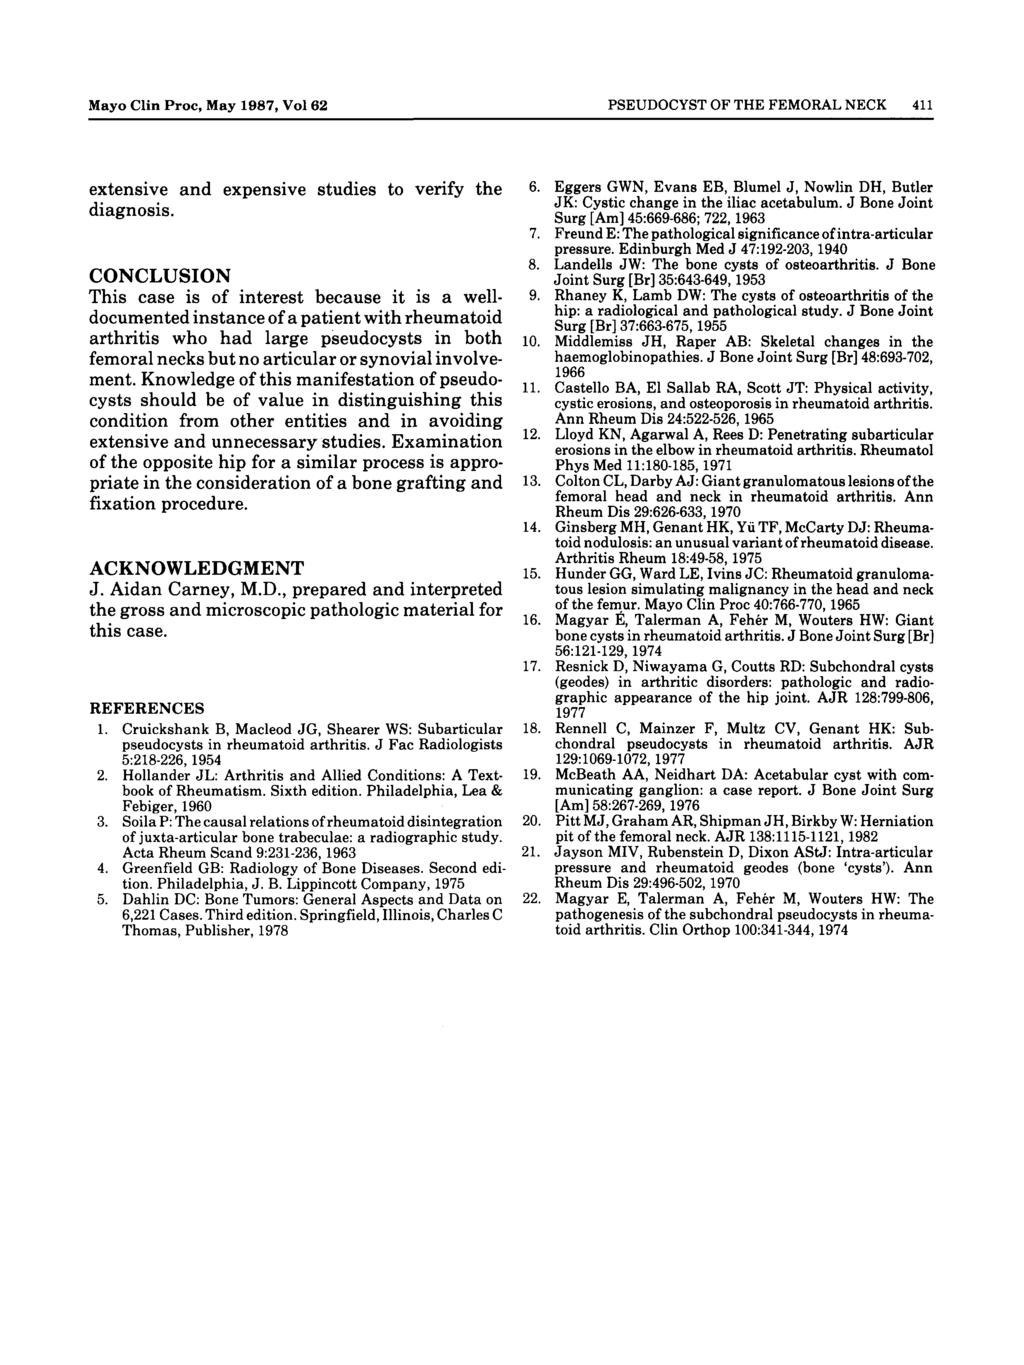 Mayo Clin Proc, May 1987, Vol 62 PSEUDOCYST OF THE FEMORAL NECK 411 extensive and expensive studies to verify the diagnosis.